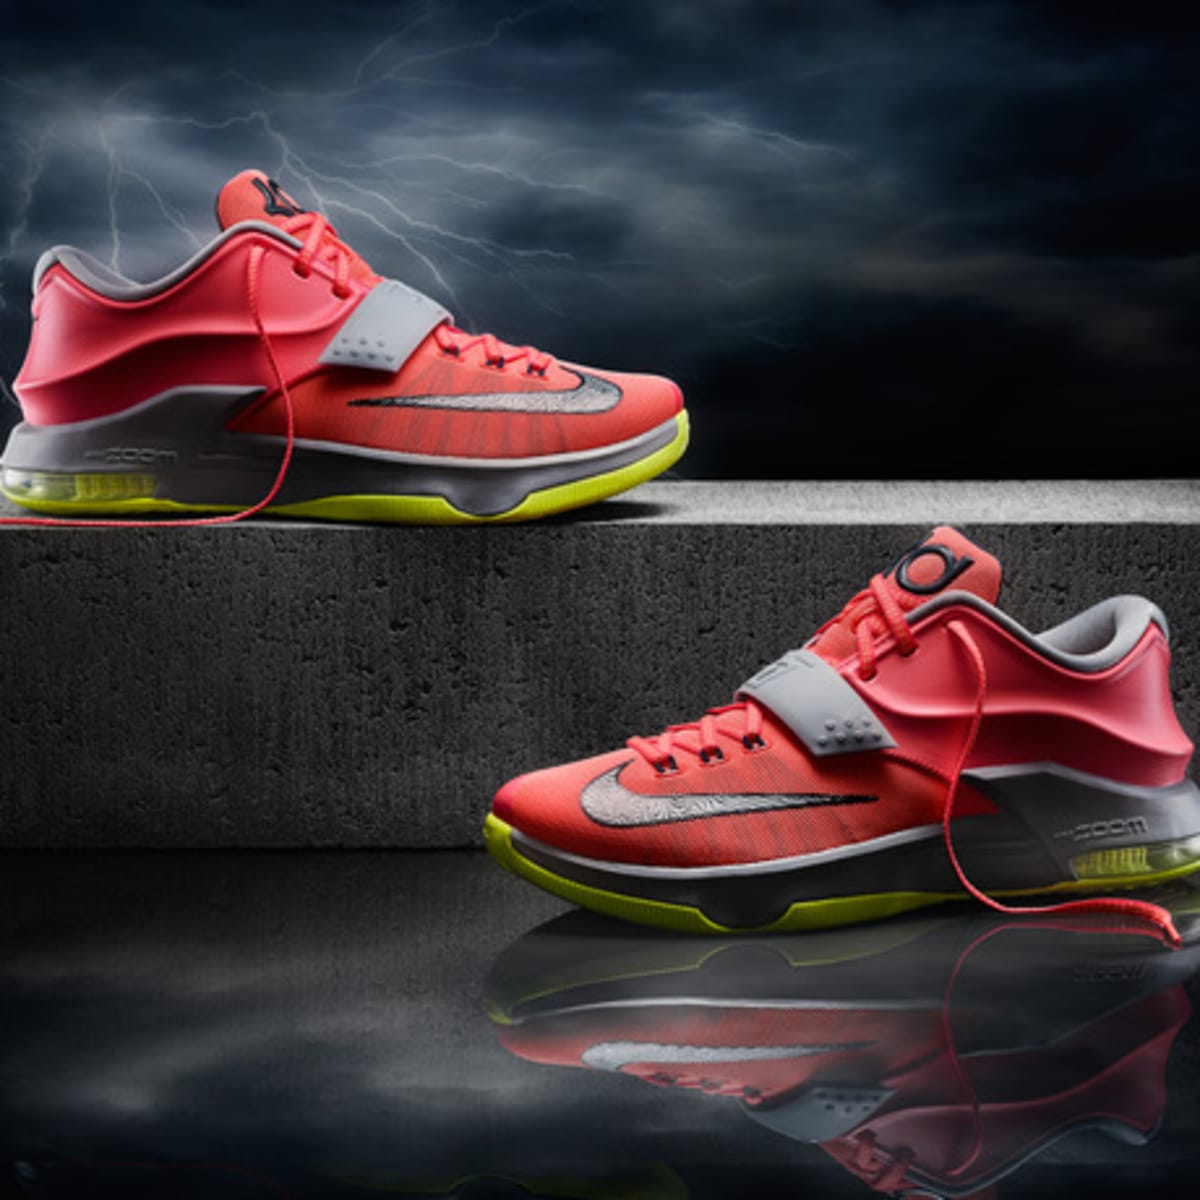 kevin durant 7 shoes